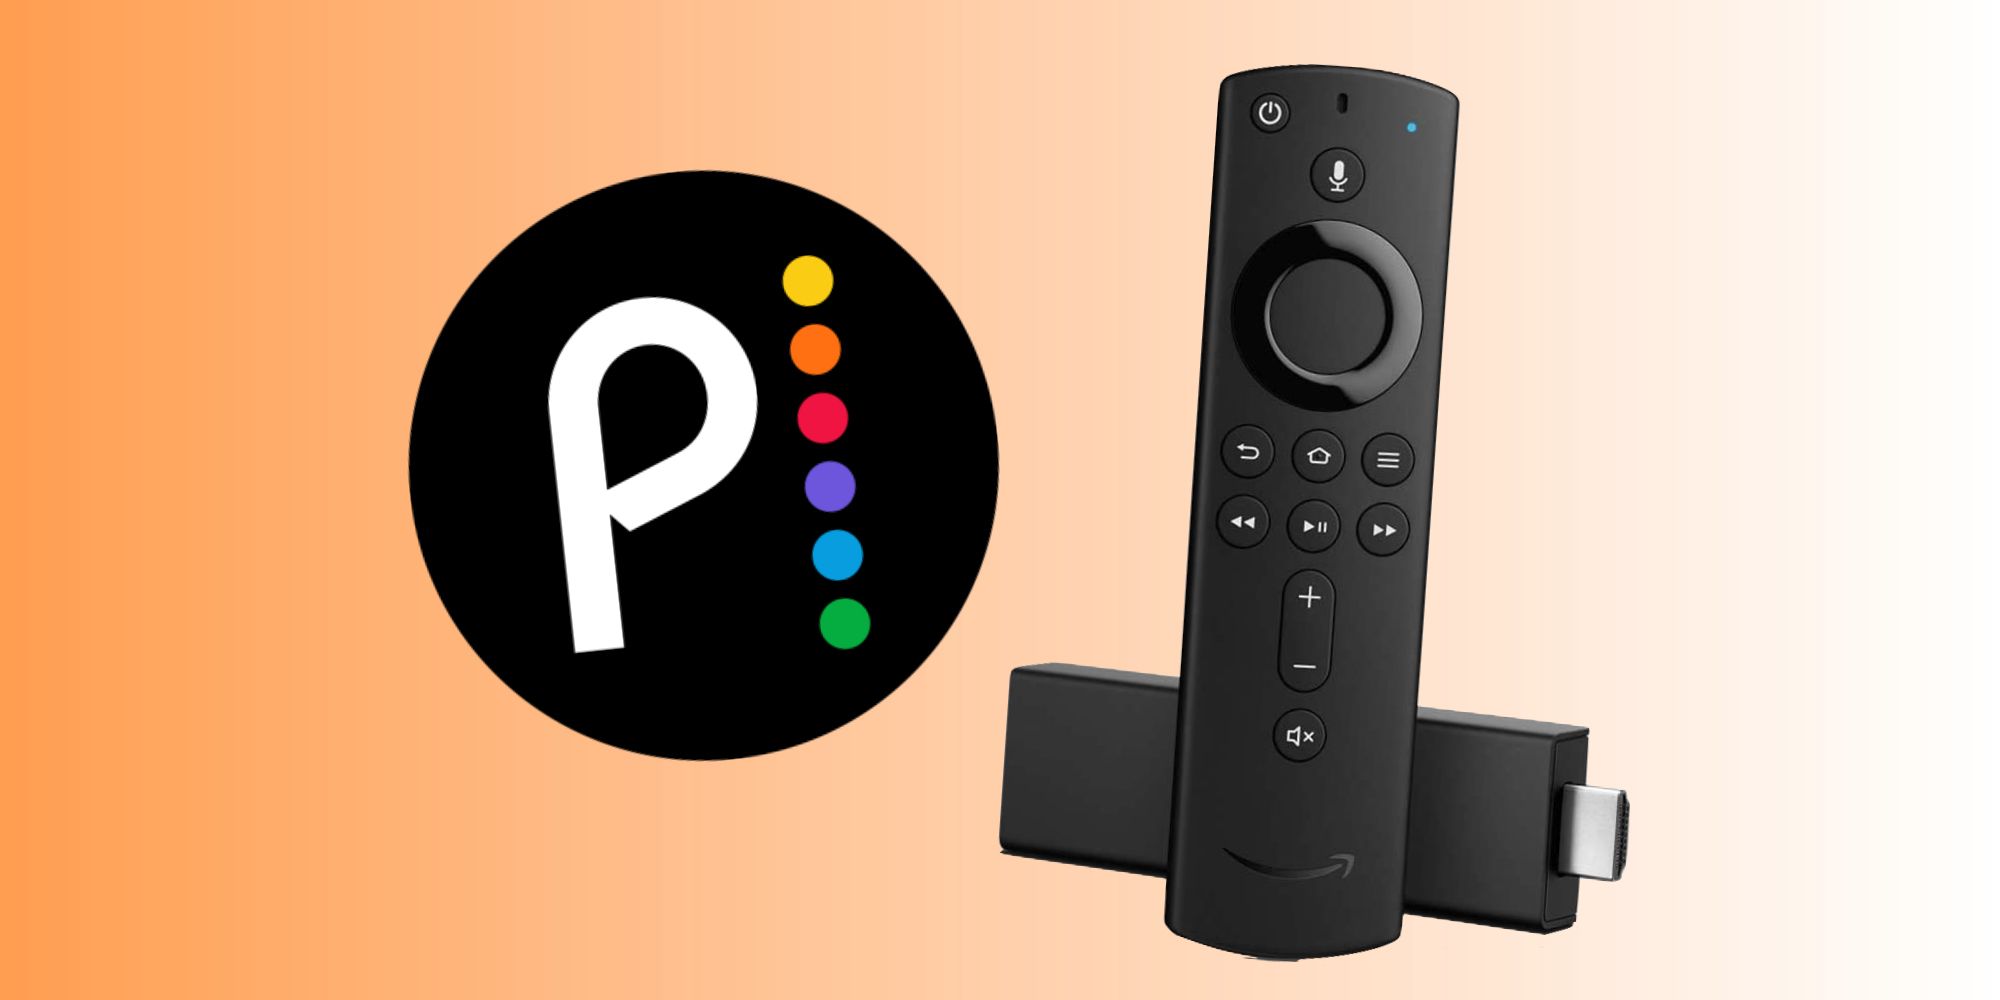 Peacock logo and Amazon Fire TV Stick 4K